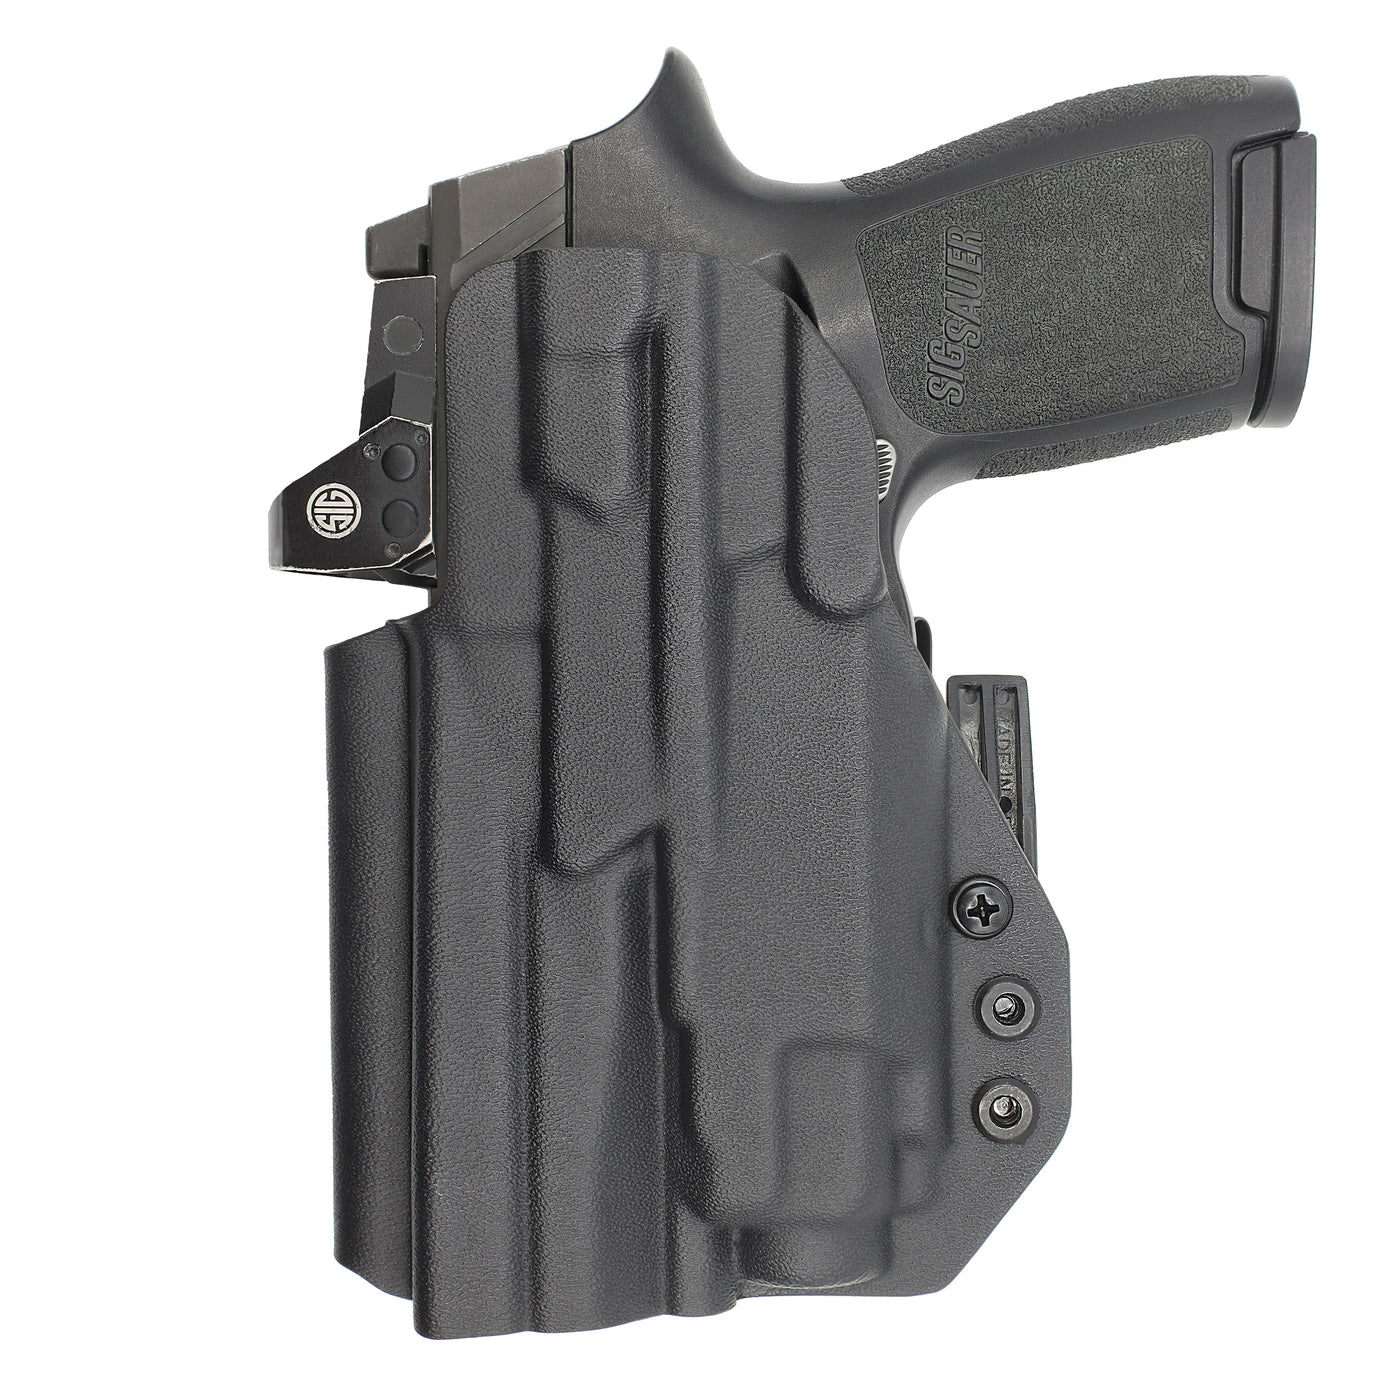 C&G Holsters custom IWB ALPHA UPGRADE Tactical Springfield XDM streamlight TLR8 holstered back view